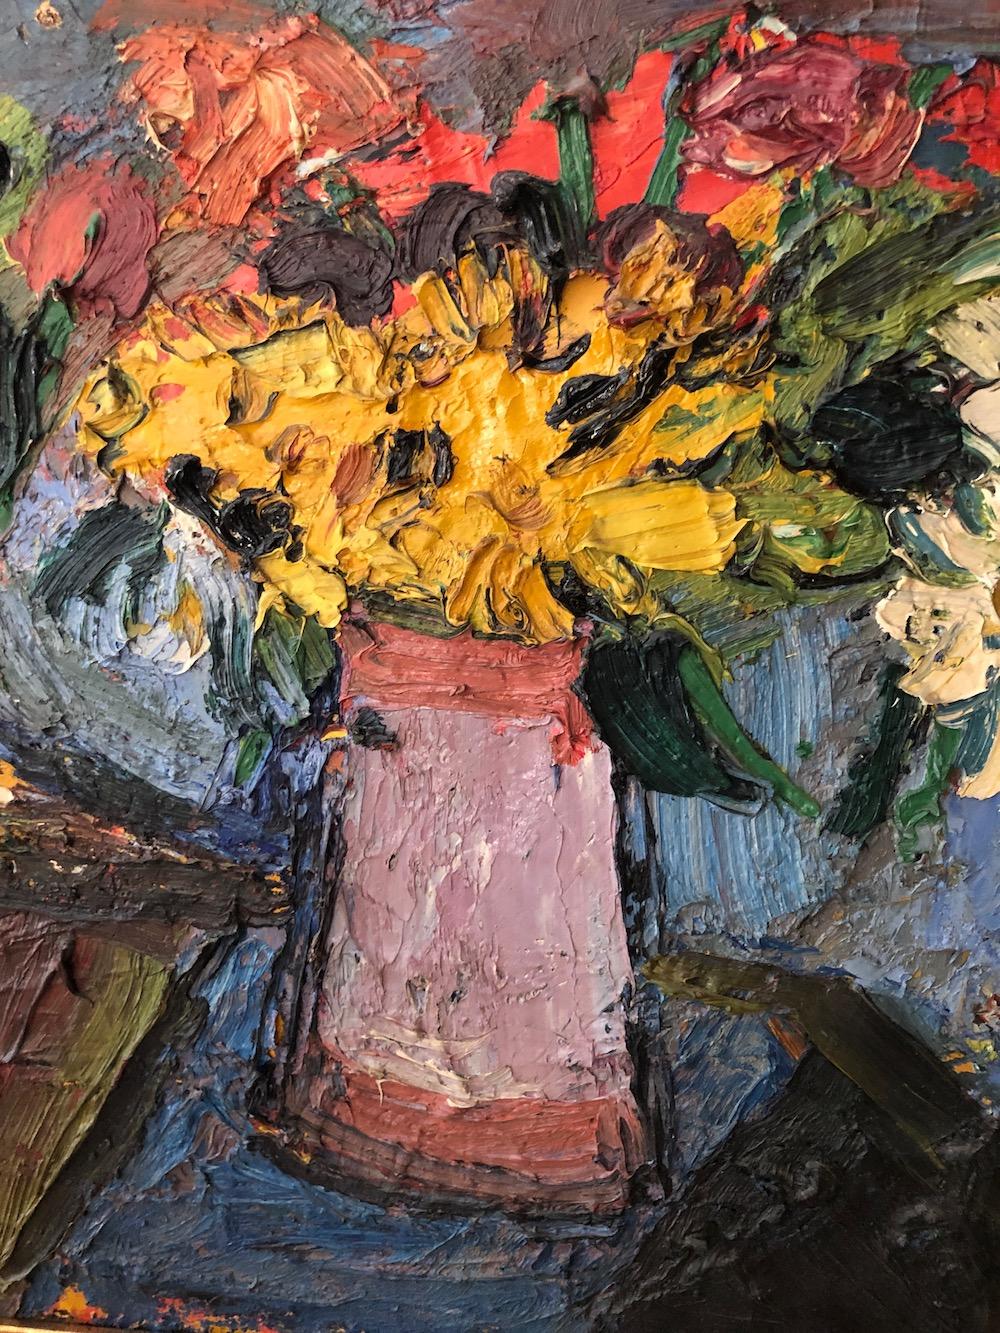 Pierre Ambrogiani (1907-1985) “Bouquets of Flowers” 1957. 
oil on canvas signed and dated lower right.